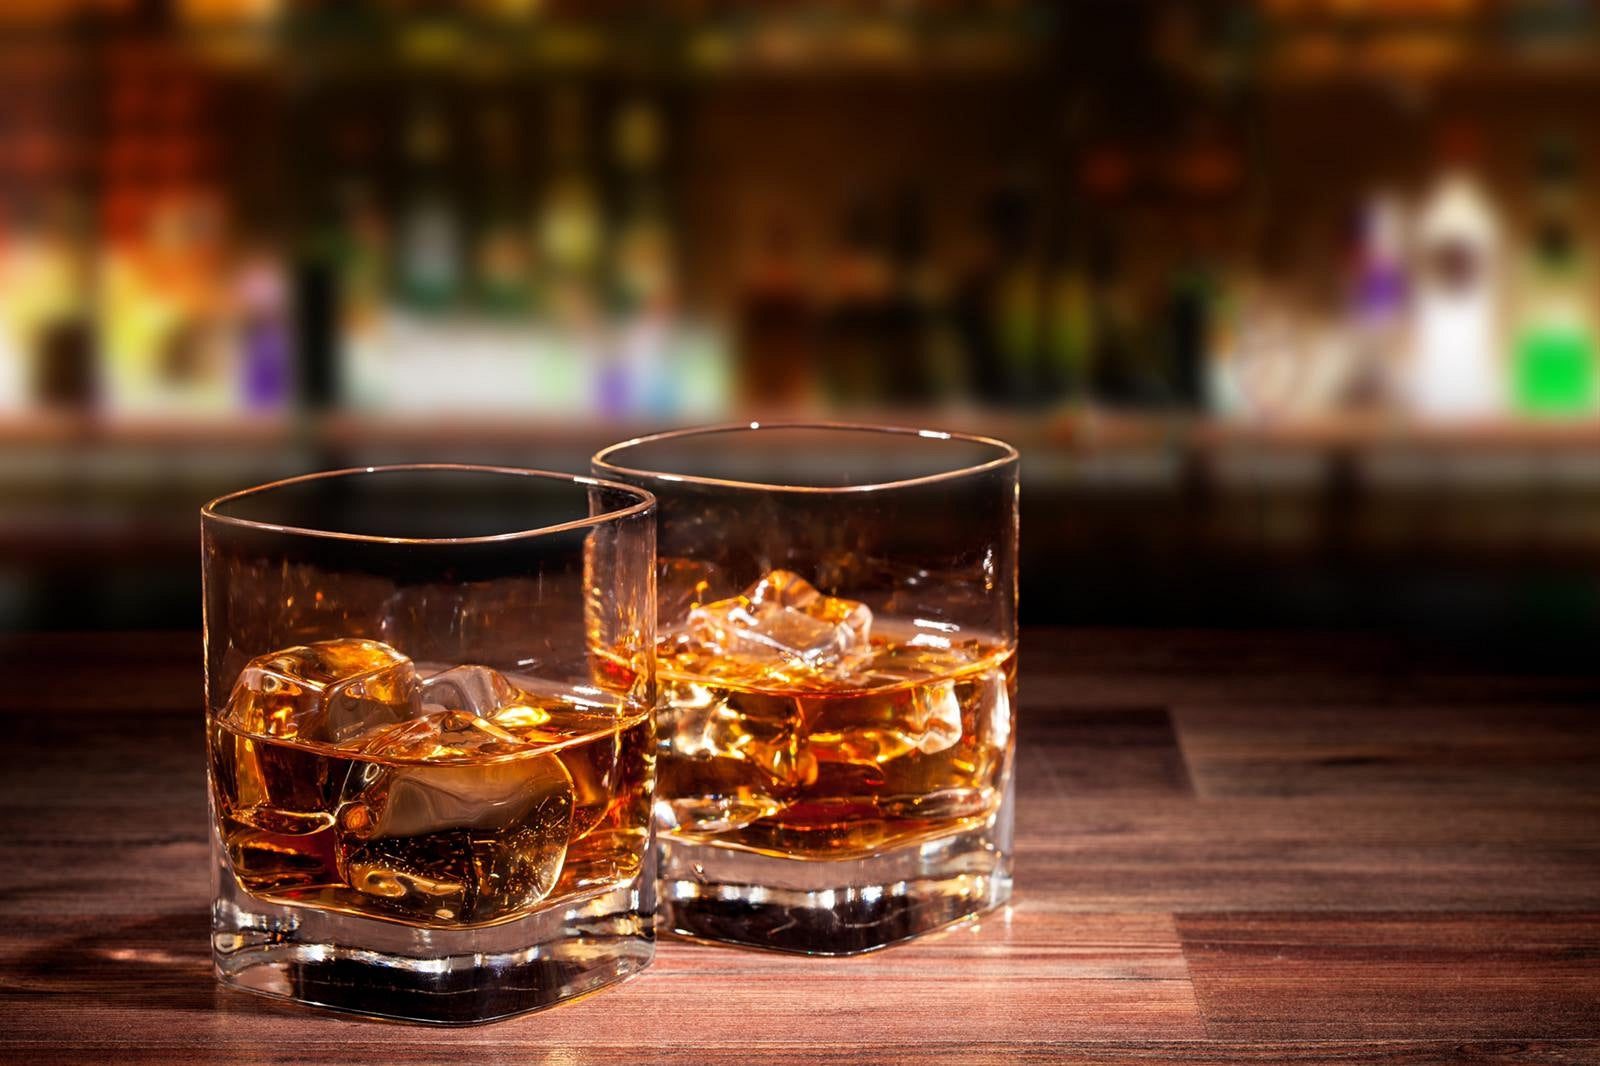 So, You Think You Know Your Whisky?